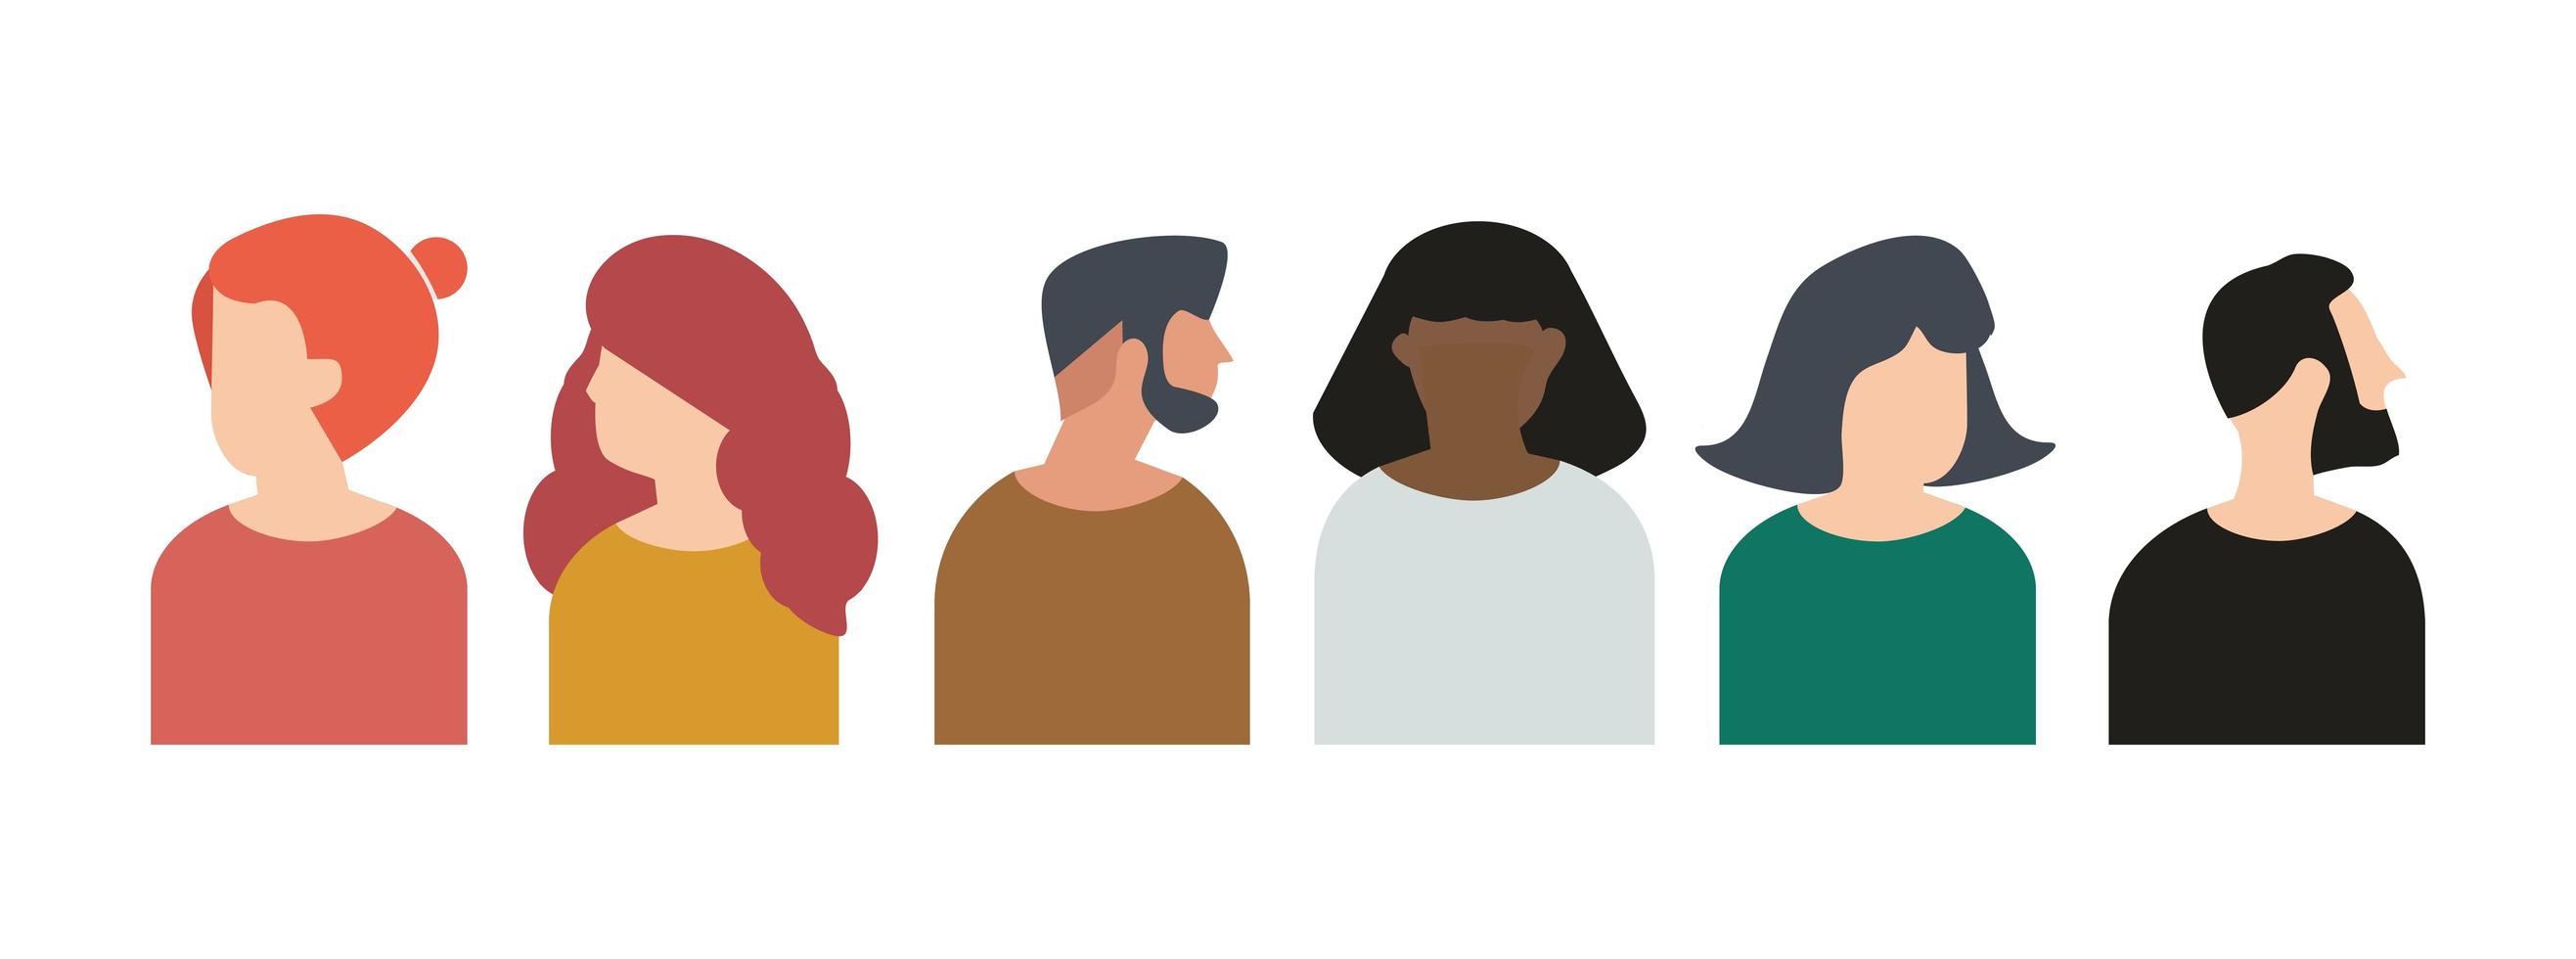 Set of people heads for avatars vector